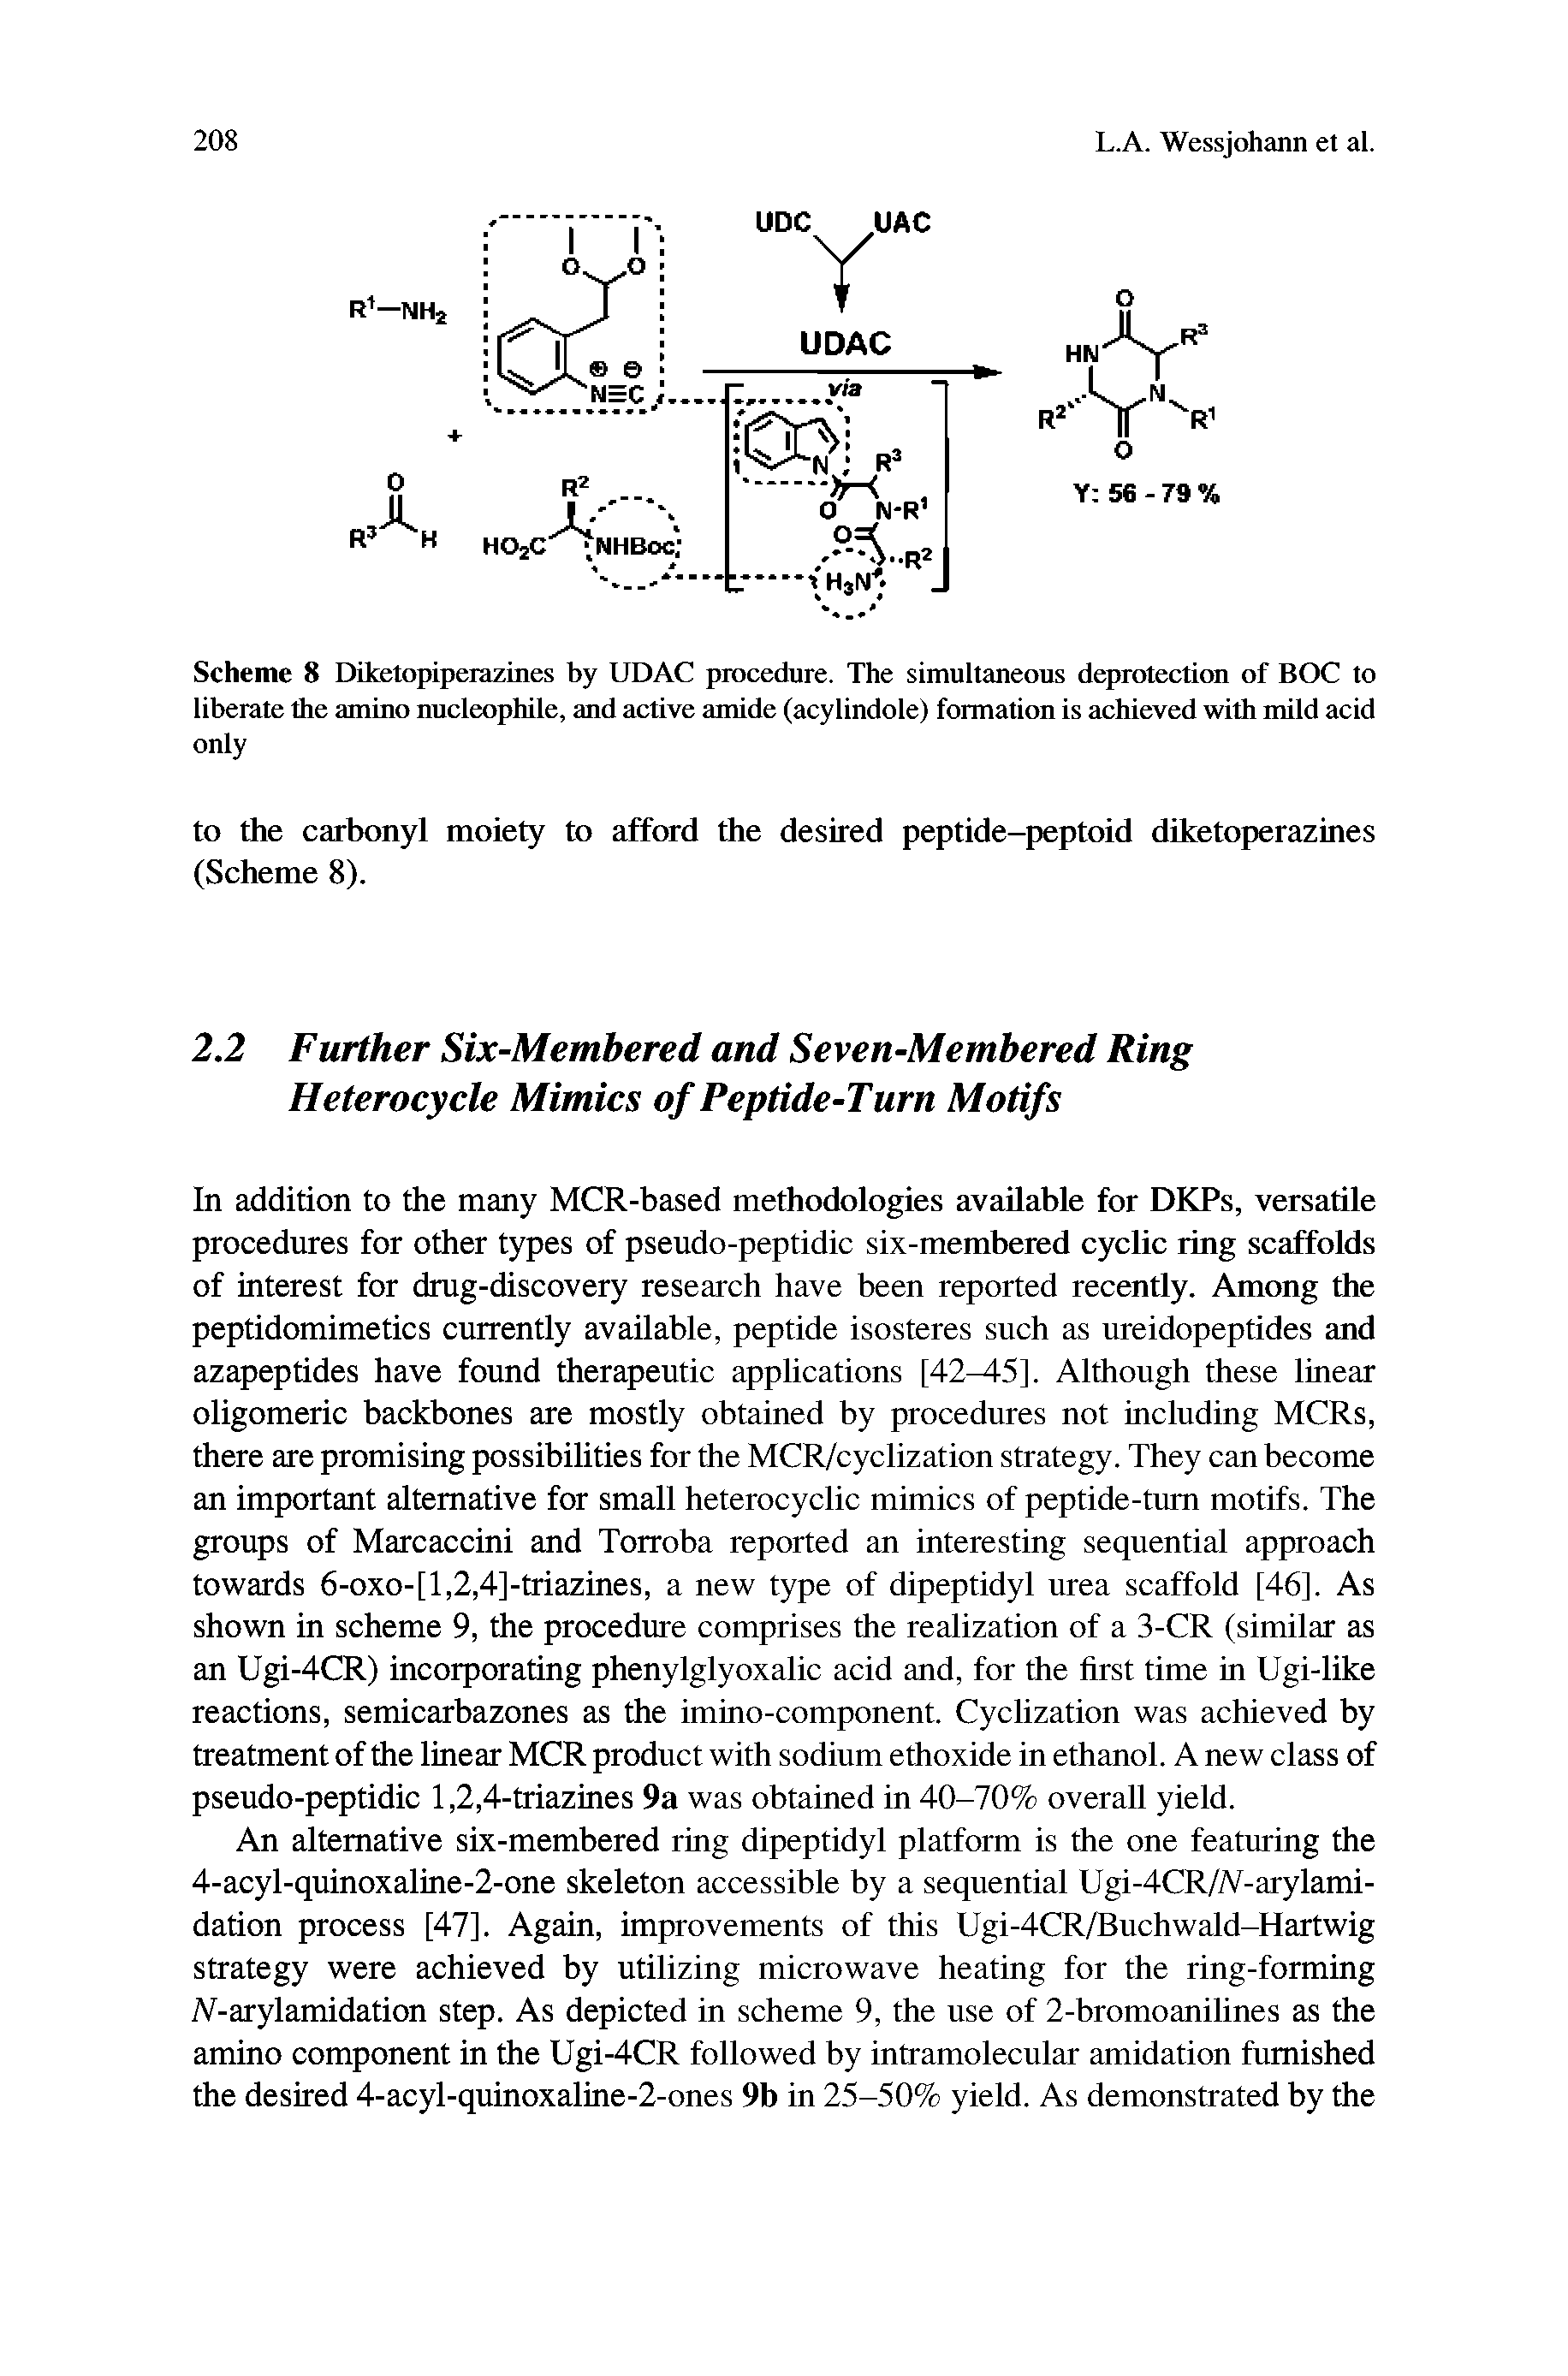 Scheme 8 Diketopiperazines by UDAC procedure. The simultaneous deprotection of BOC to liberate the amino nucleophile, and active amide (acylindole) formation is achieved with mild acid only...